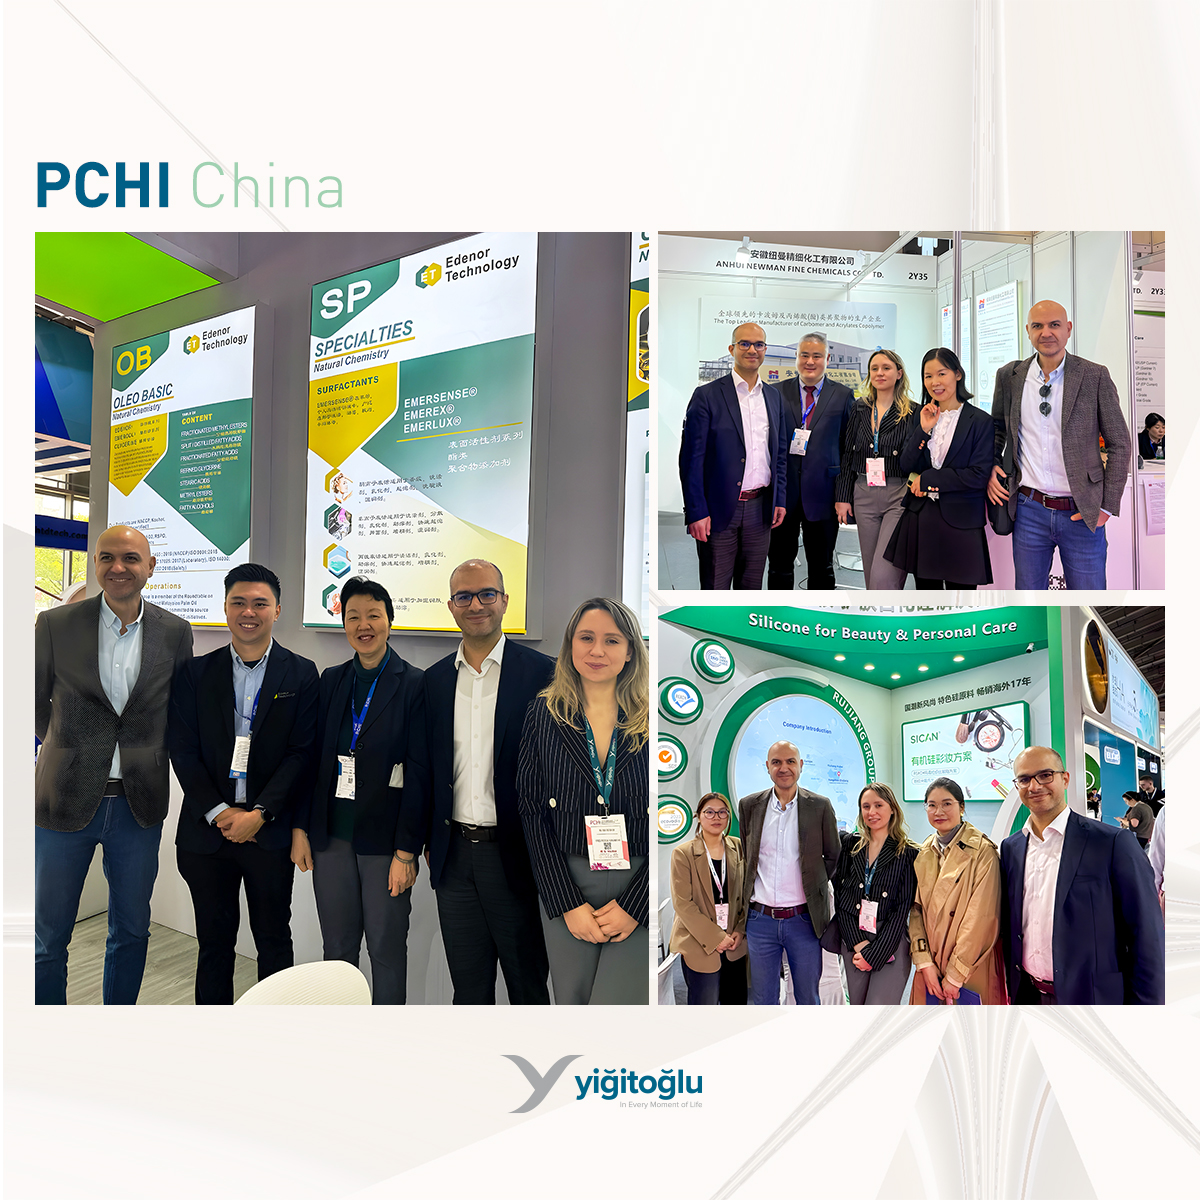 🌟 Team Yiğitoğlu's Remarkable Journey at FIC & PCHI China! 🌟
We're thrilled to share snapshots of our vibrant team at the Food Ingredients China (FIC) and Personal Care and Homecare Ingredients (PCHI) fairs. #YiğitoğluAdventures #FICChina #PCHIChina #InnovationInHealth